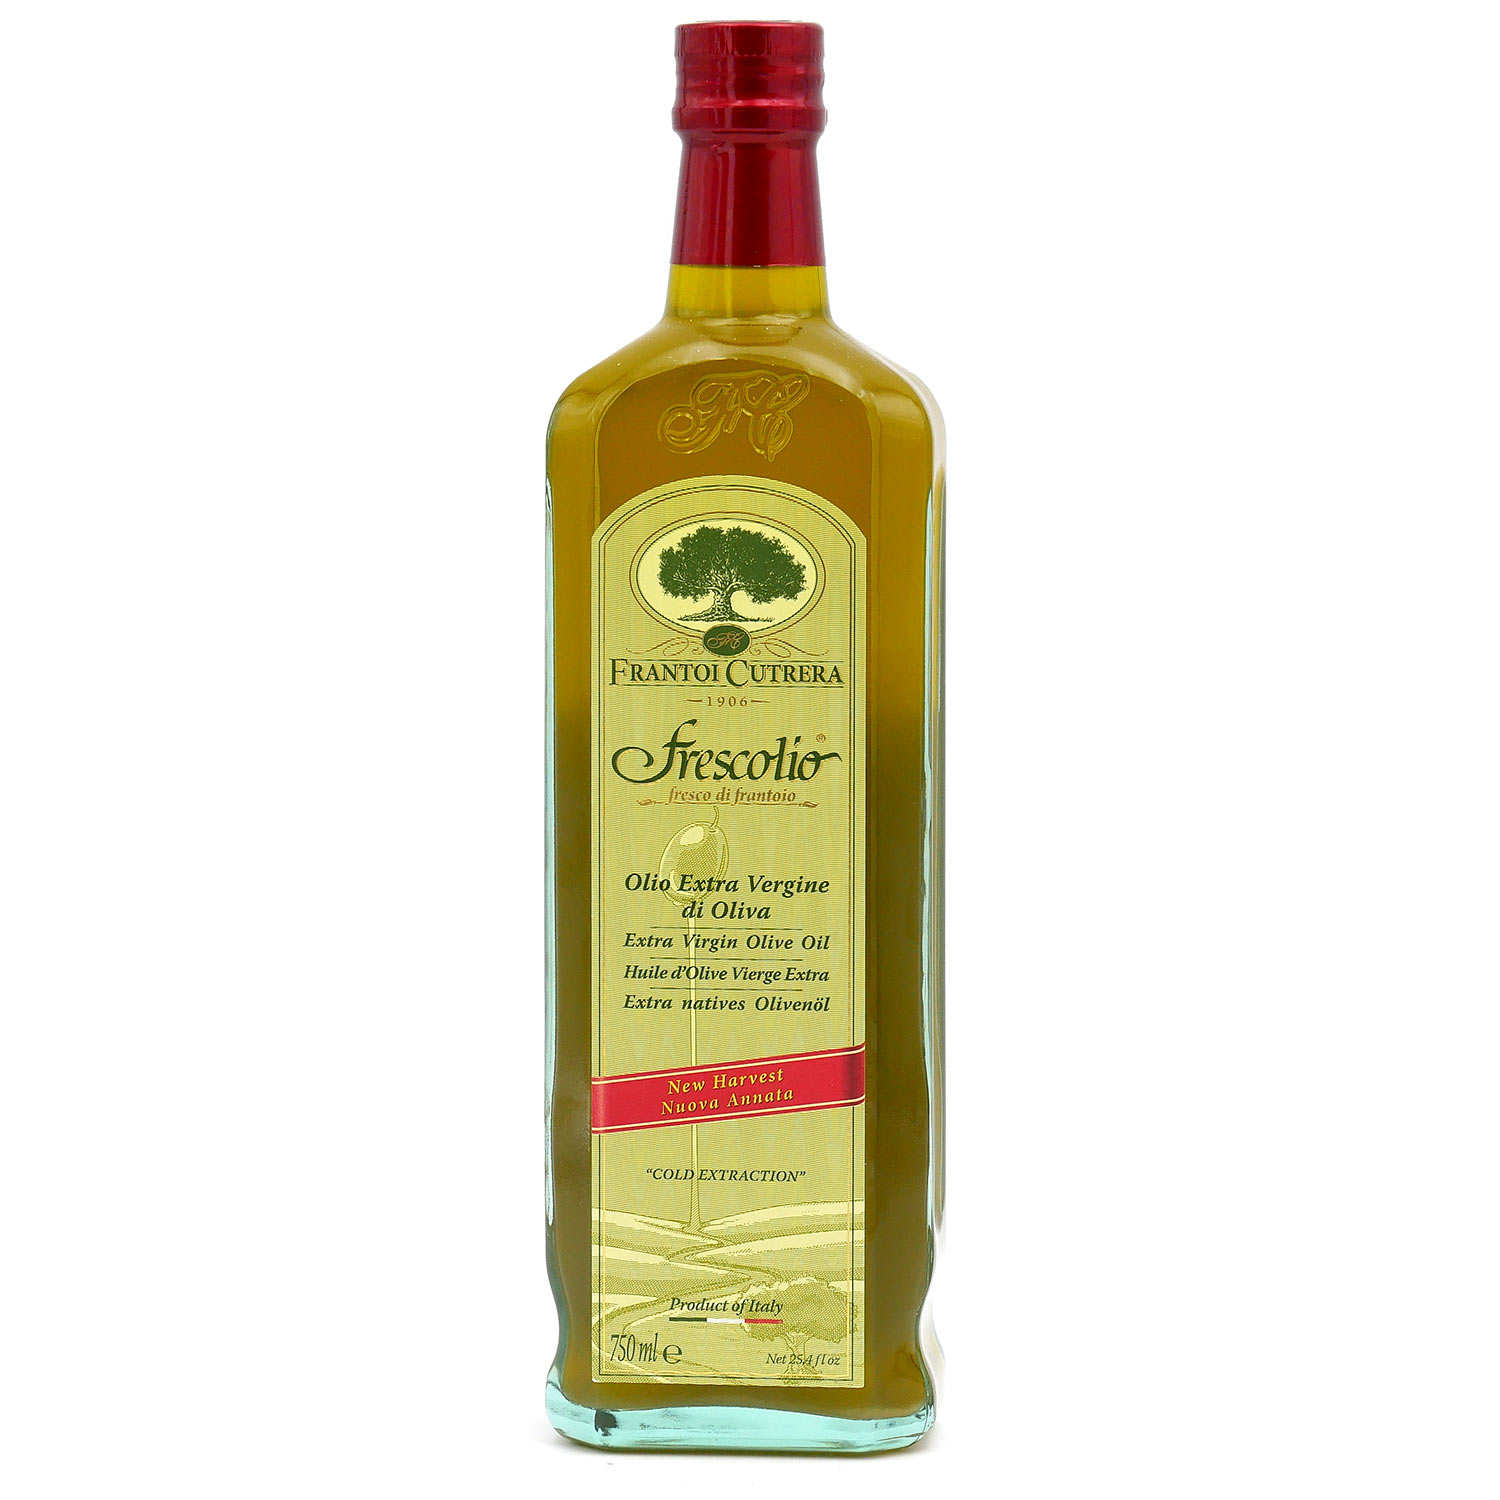 HUILE D’OLIVE EXTRAVIERGE 100% ITALIEN SPRAY BOUTEILLE PLASTIQUE 250ML CR